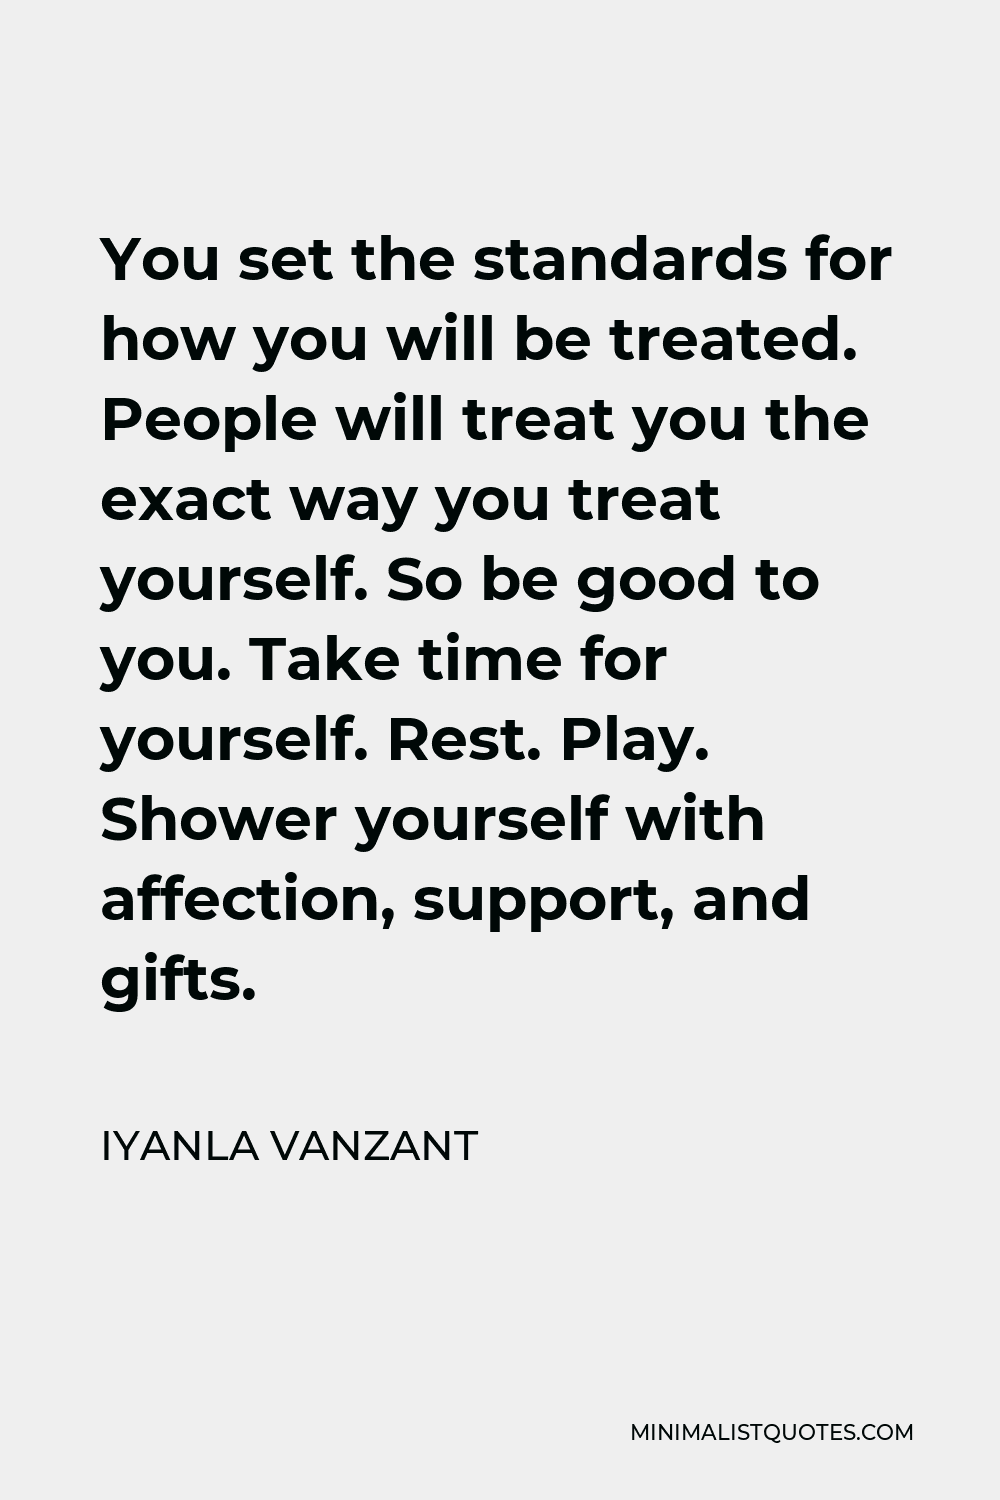 Iyanla Vanzant Quote - You set the standards for how you will be treated. People will treat you the exact way you treat yourself. So be good to you. Take time for yourself. Rest. Play. Shower yourself with affection, support, and gifts.